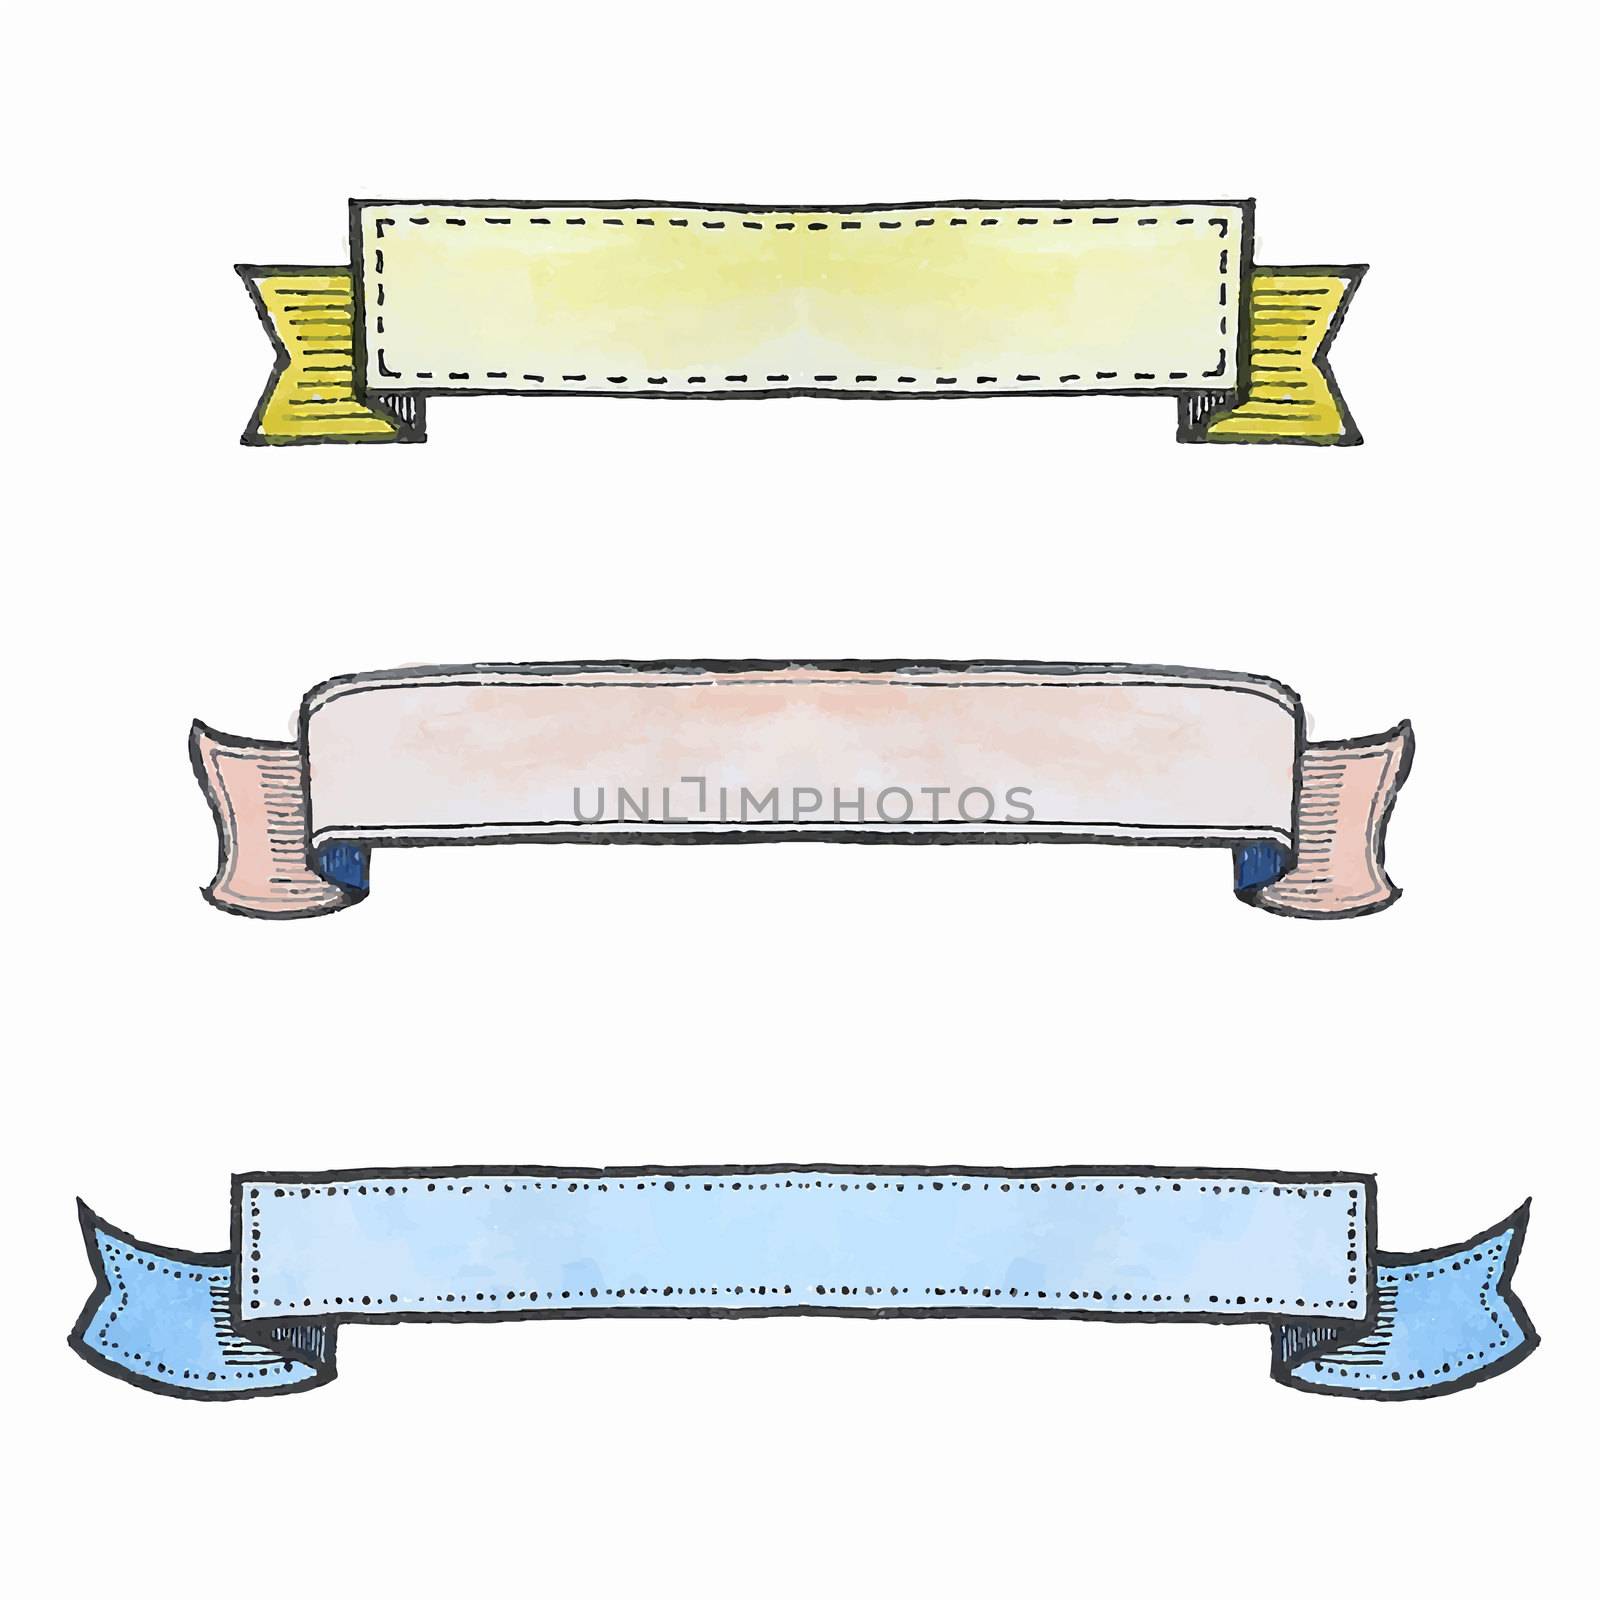 Freehand illustration of set of watercolor ribbon banners on white background, doodle hand drawn